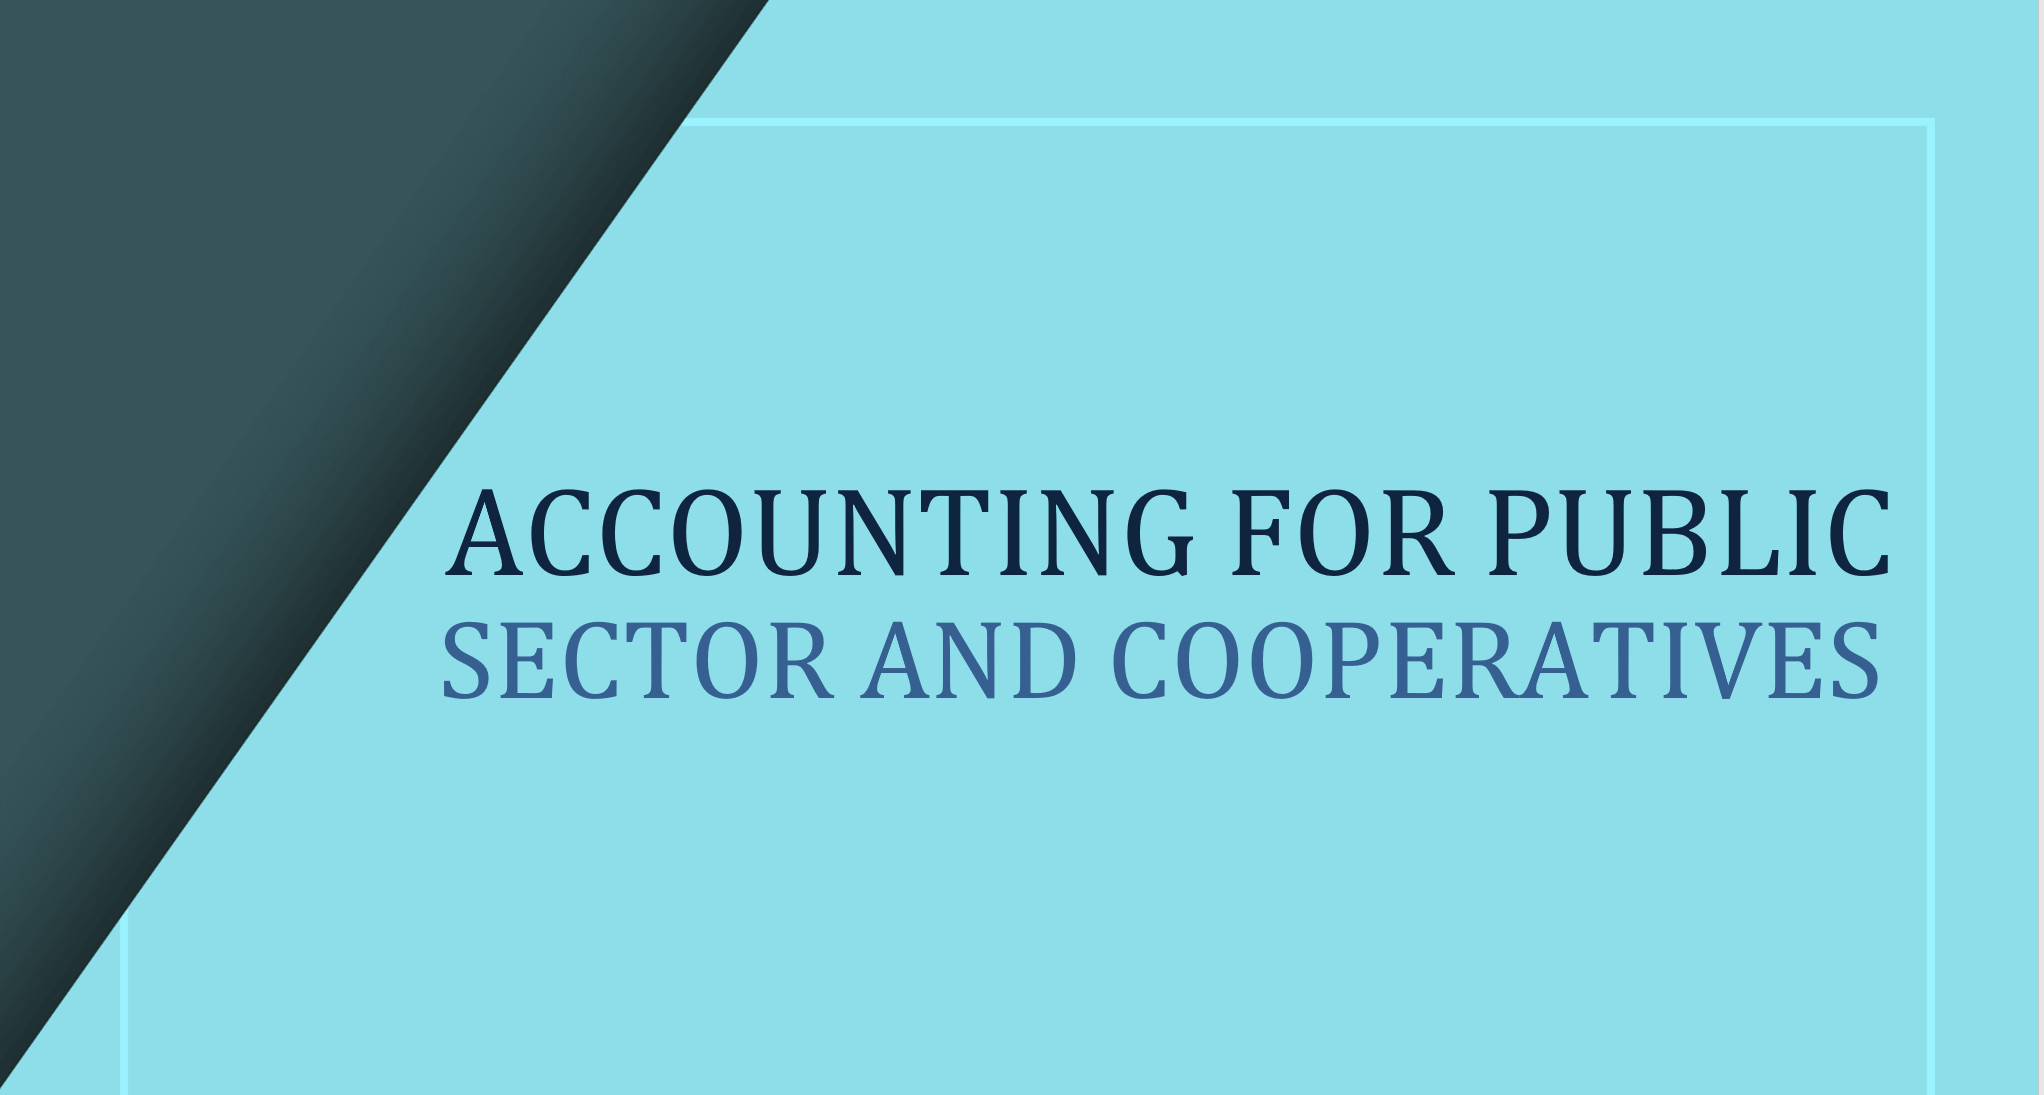 T8: Accounting for Public Sector and Cooperatives